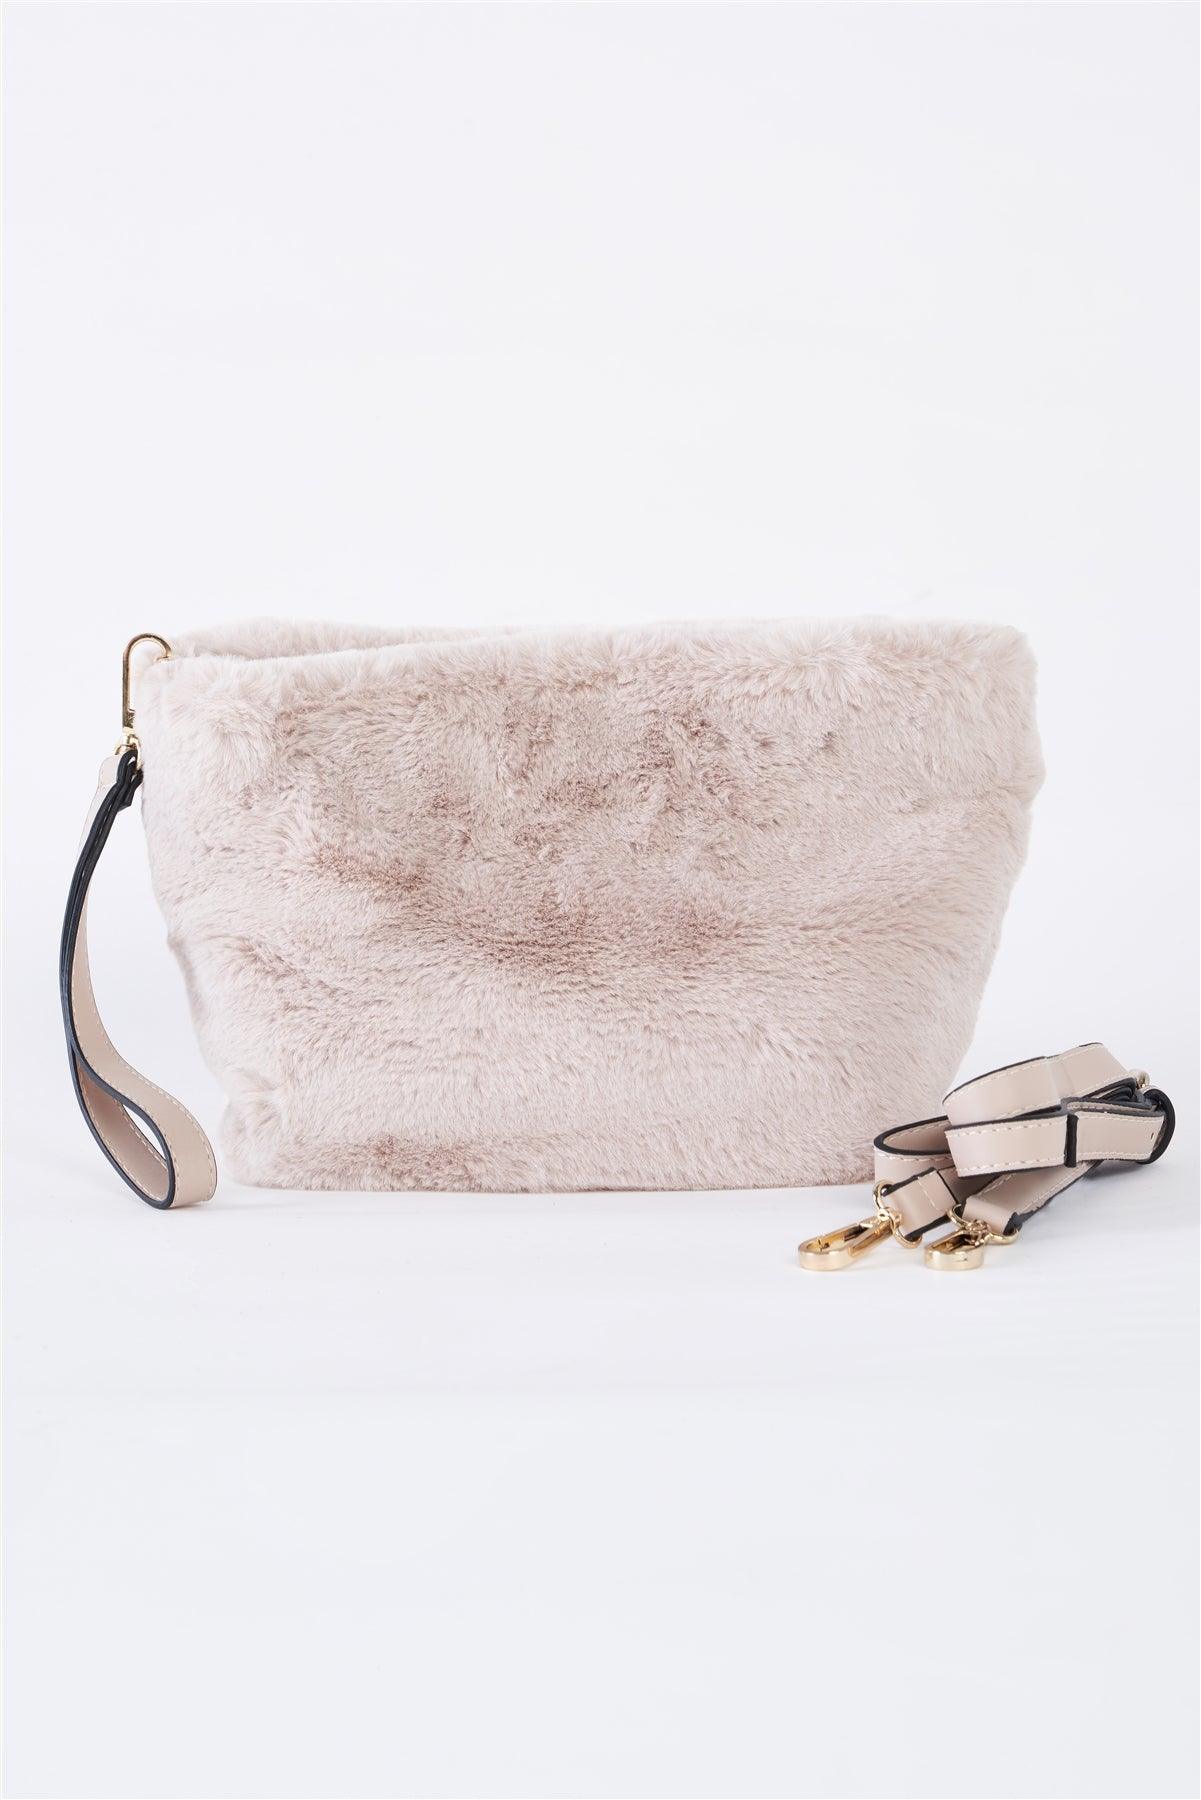 Ivory Faux Fur Hidden Magnetic Snap Button Closure Crossbody Bag / Clutch With Hidden Hand Strap Loop / 3 bags